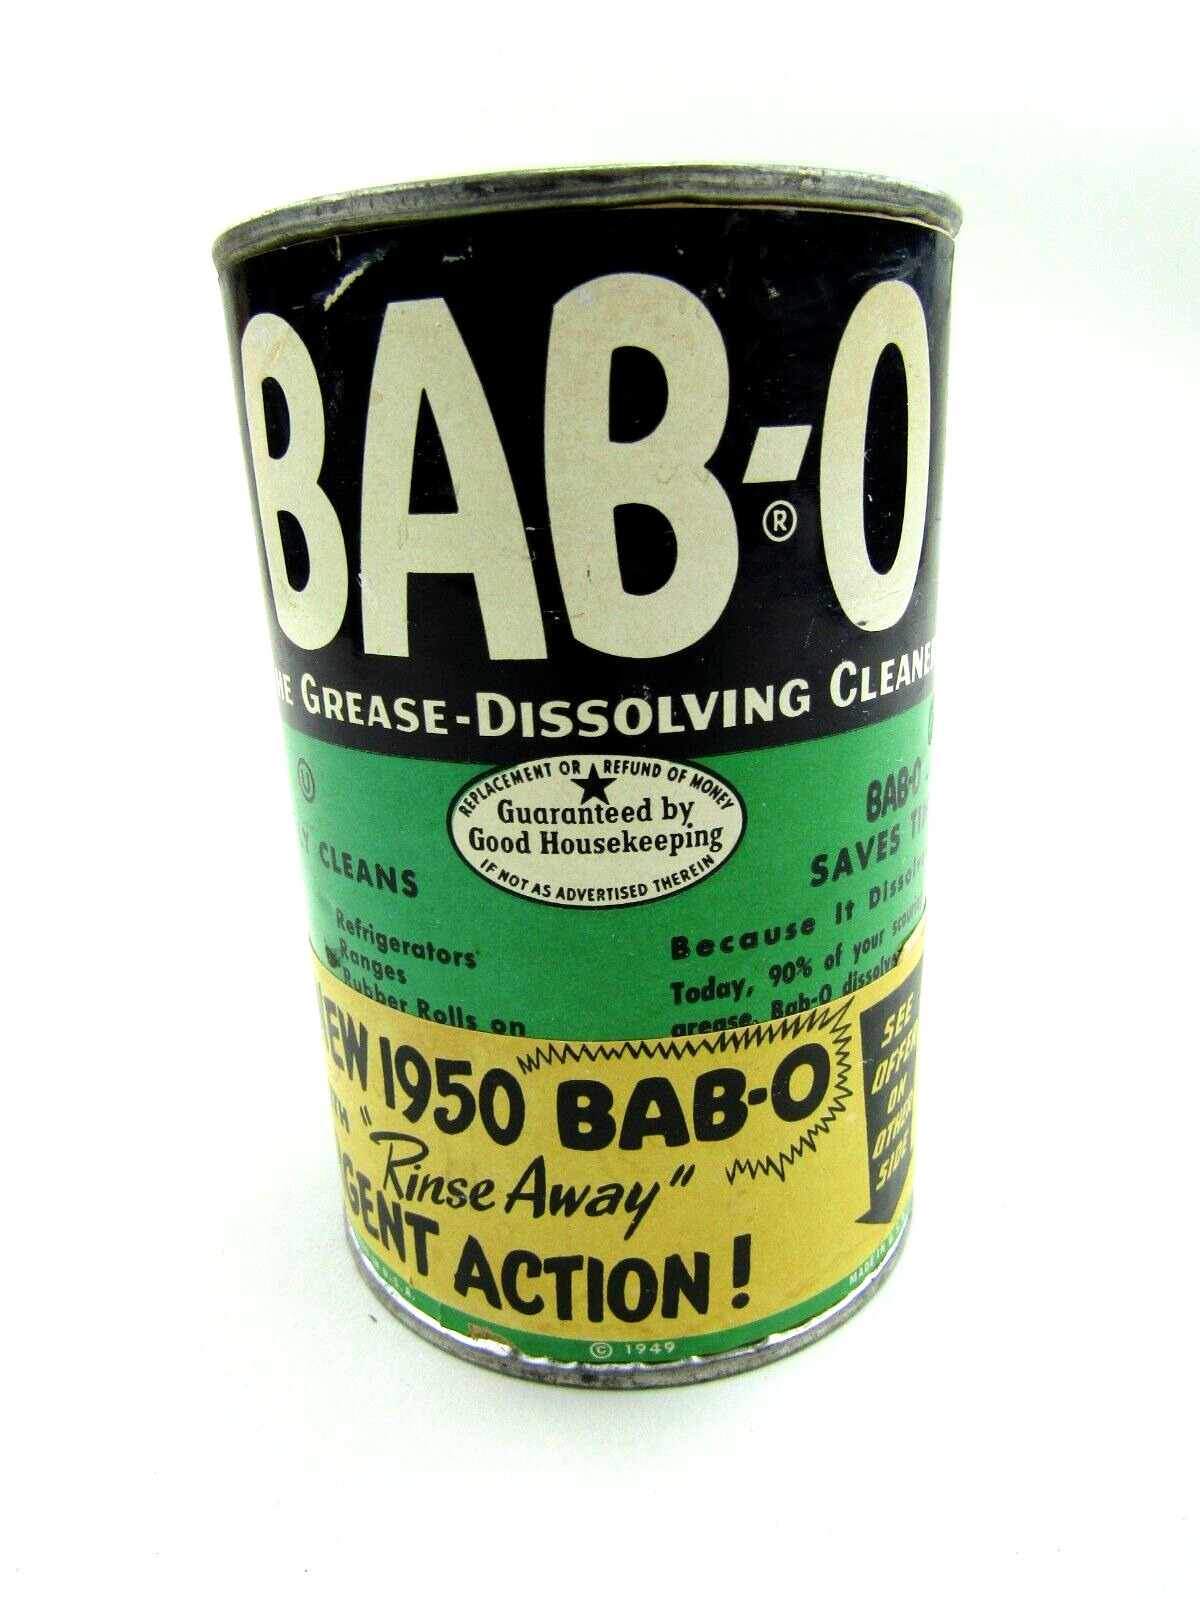 Vintage Bab-O Grease Cleaner 1949 Unused Tin Advertising Container Collectible